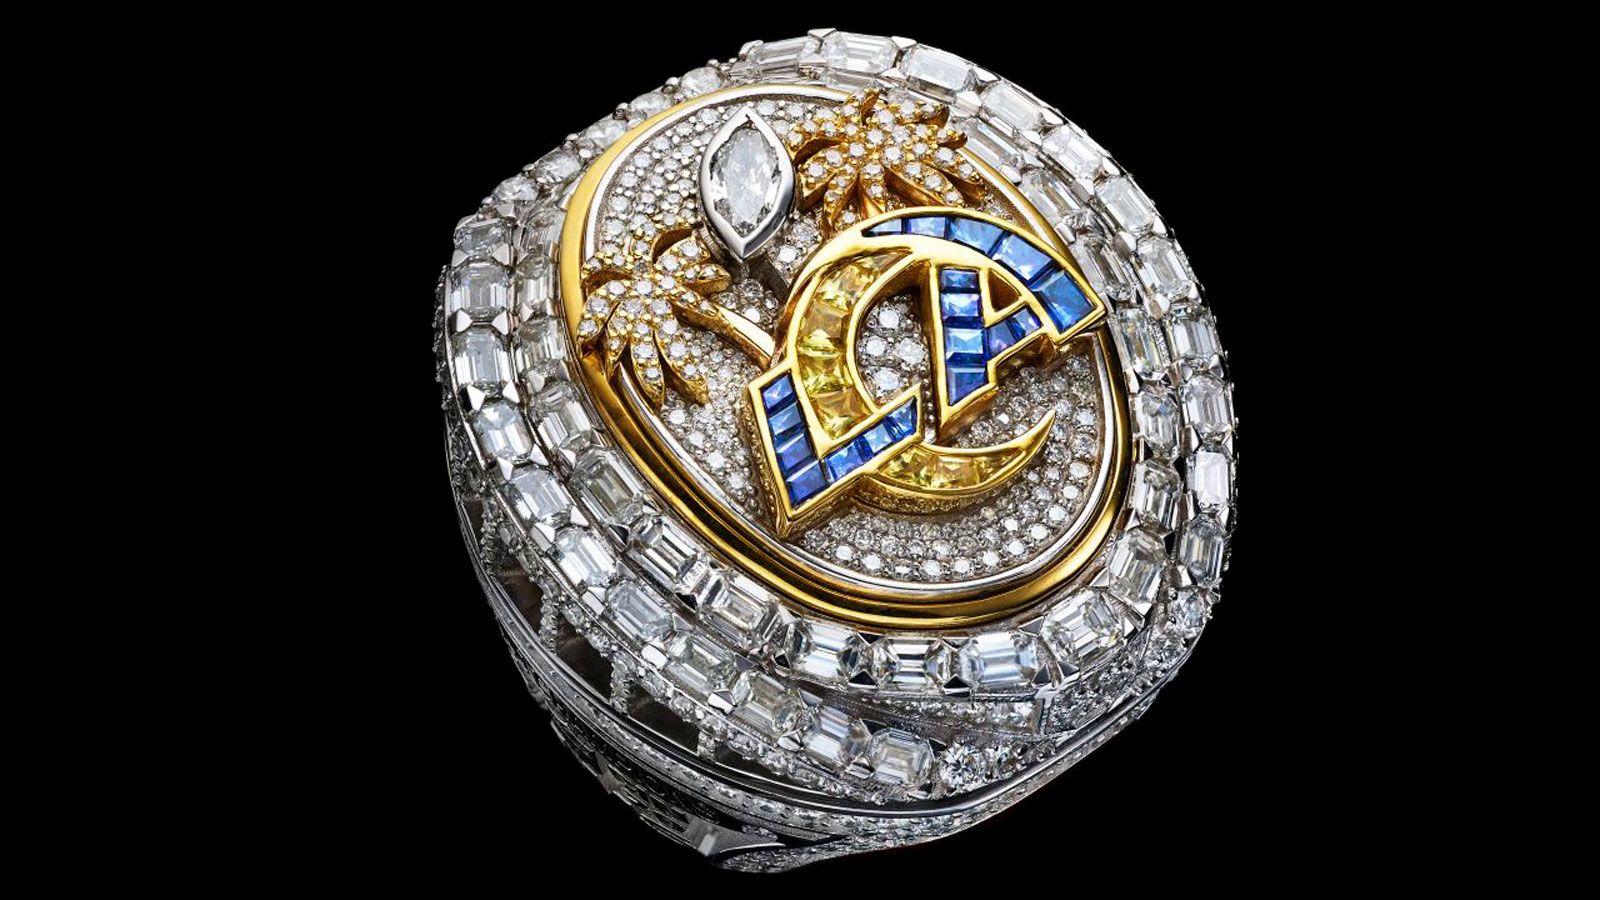 All Super Bowl Rings In NFL History